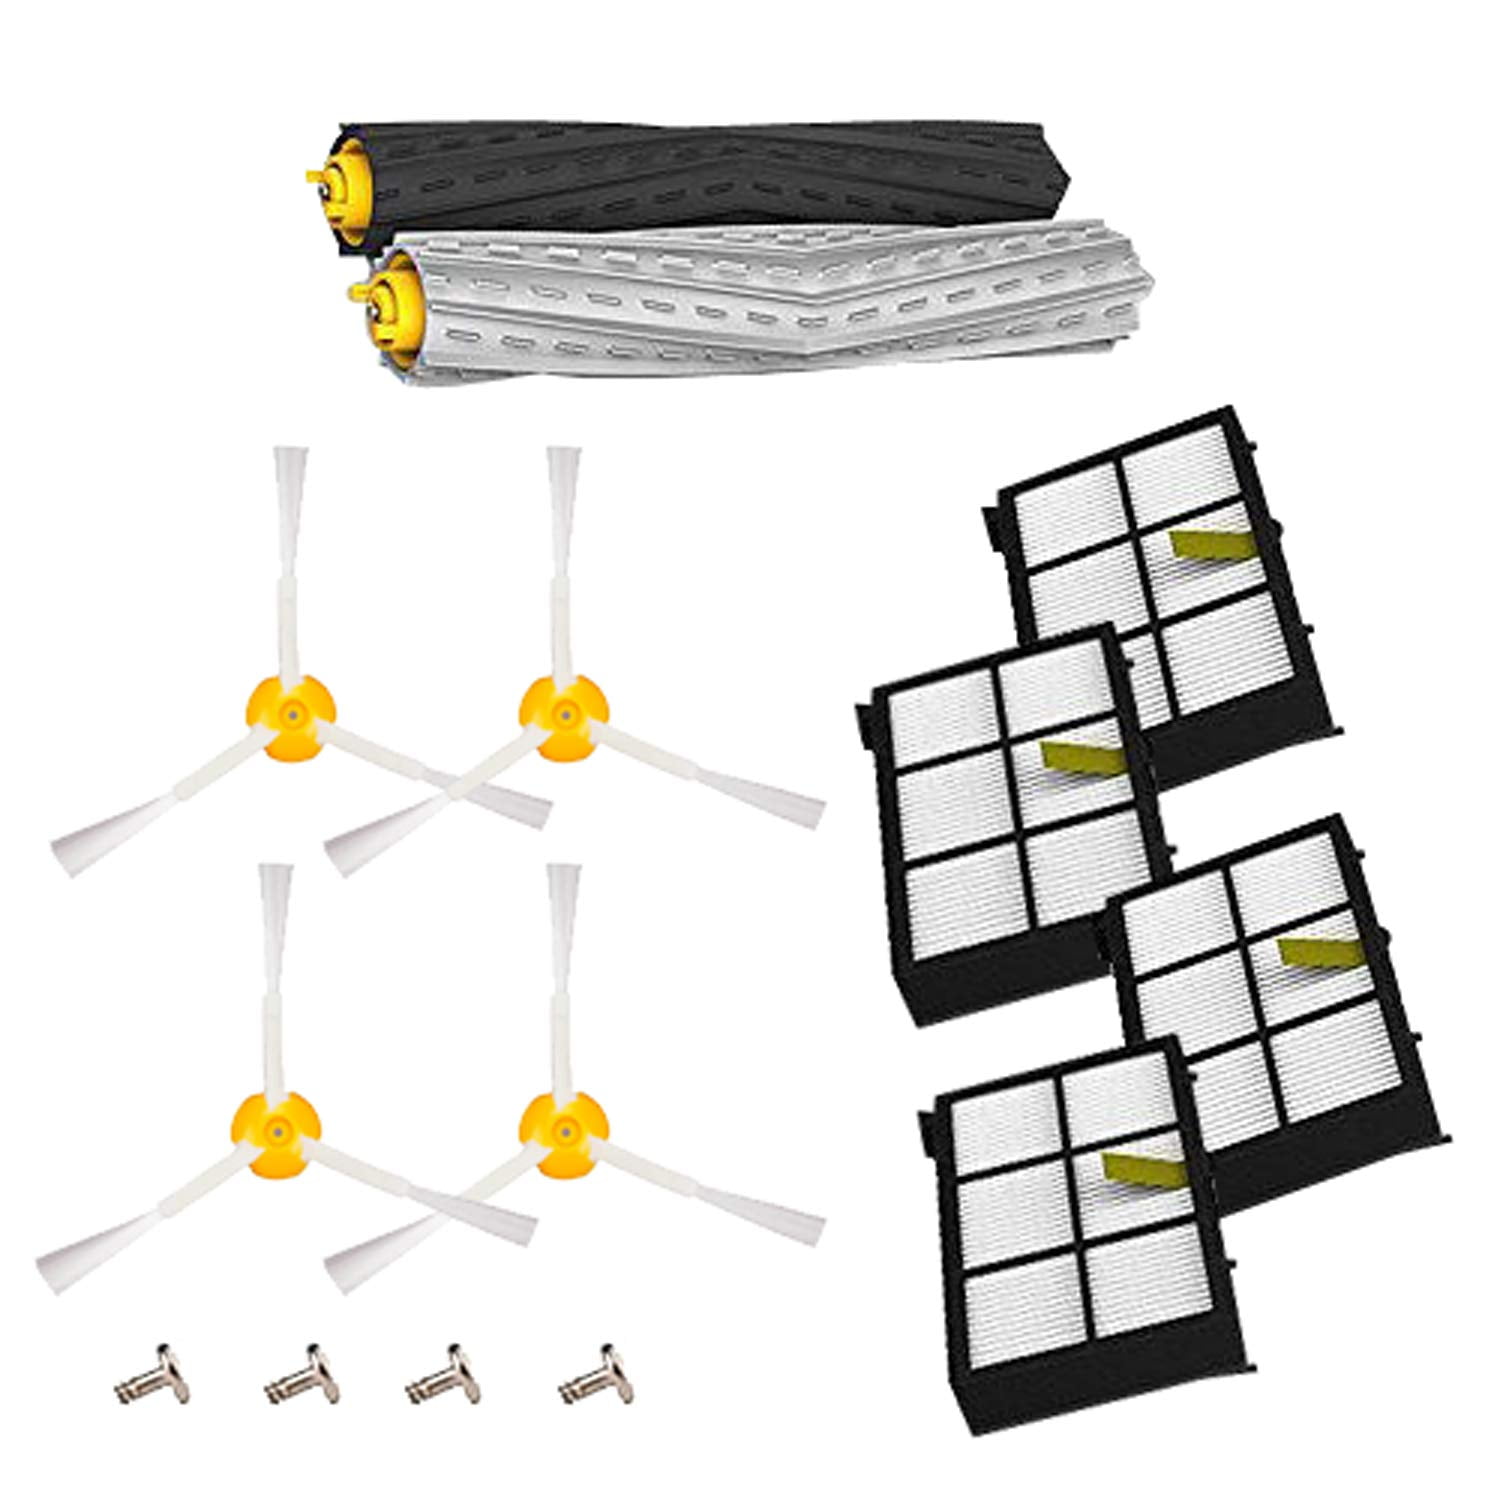 Details about   Replacement Kit Accessories for iRobot Roomba 800 900 Series 860 880 890 960 980 